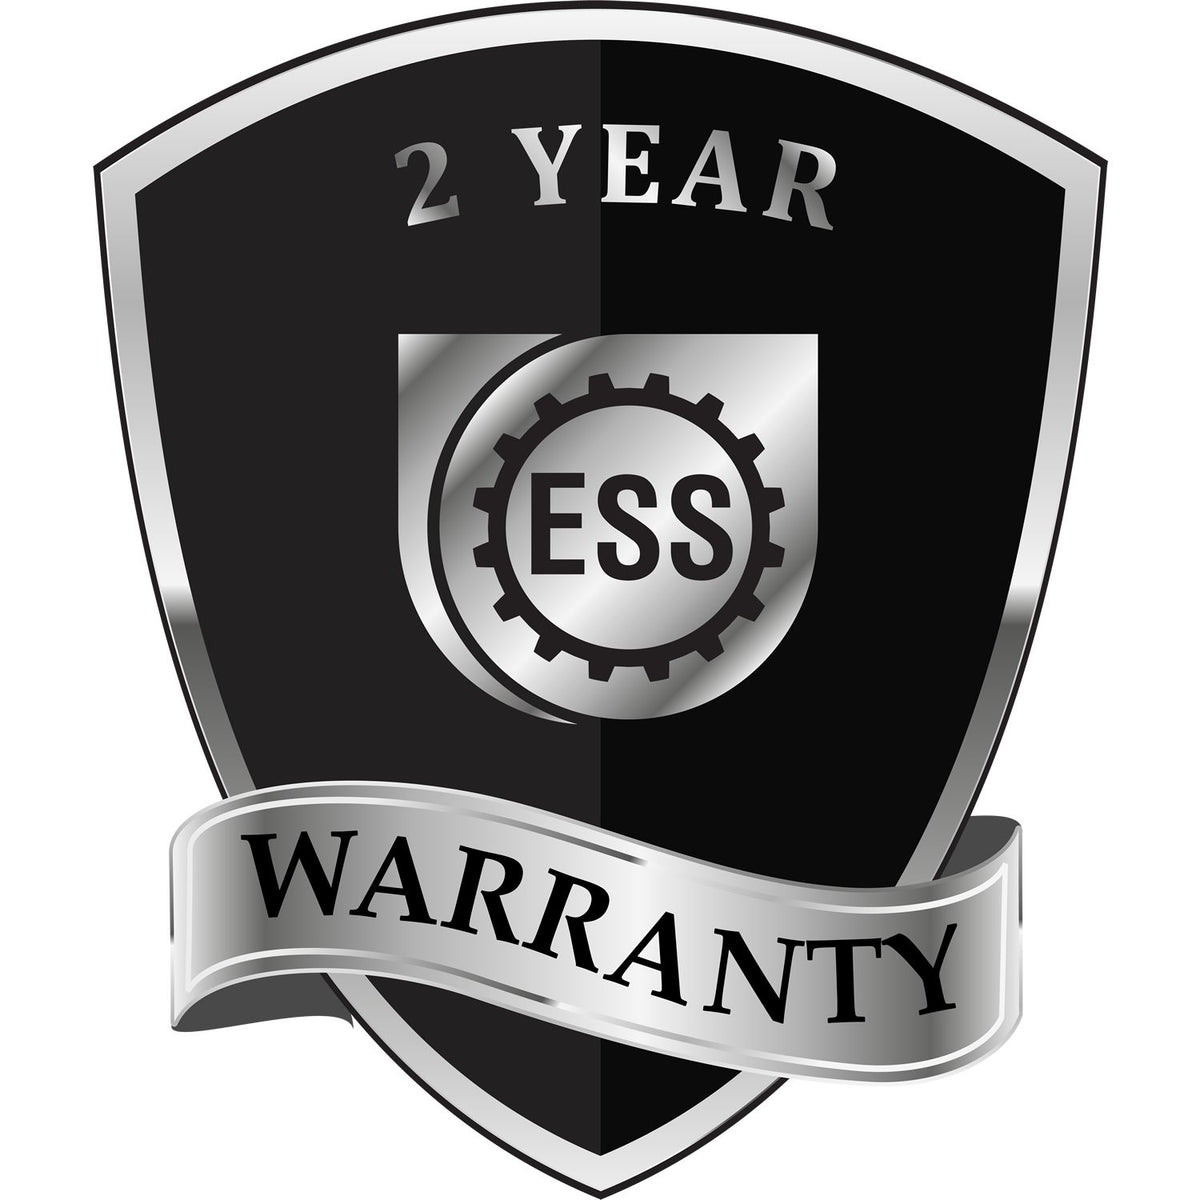 A badge or emblem showing a warranty icon for the Long Reach Oklahoma PE Seal